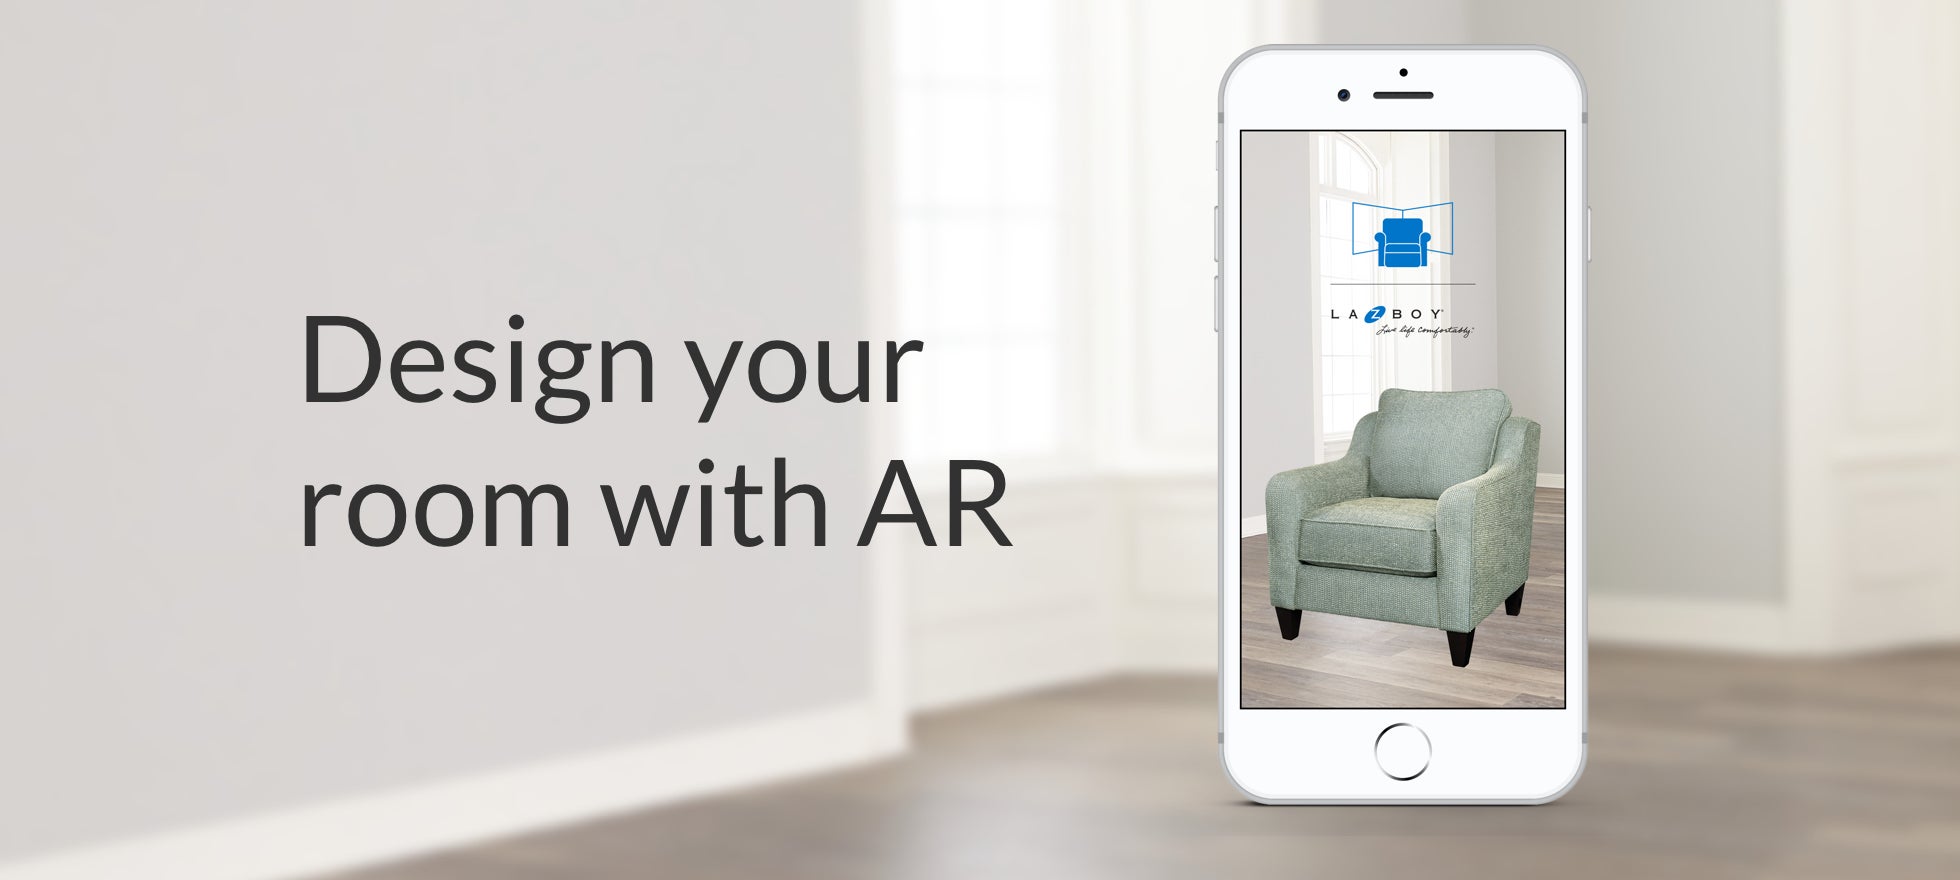 Design your room with AR